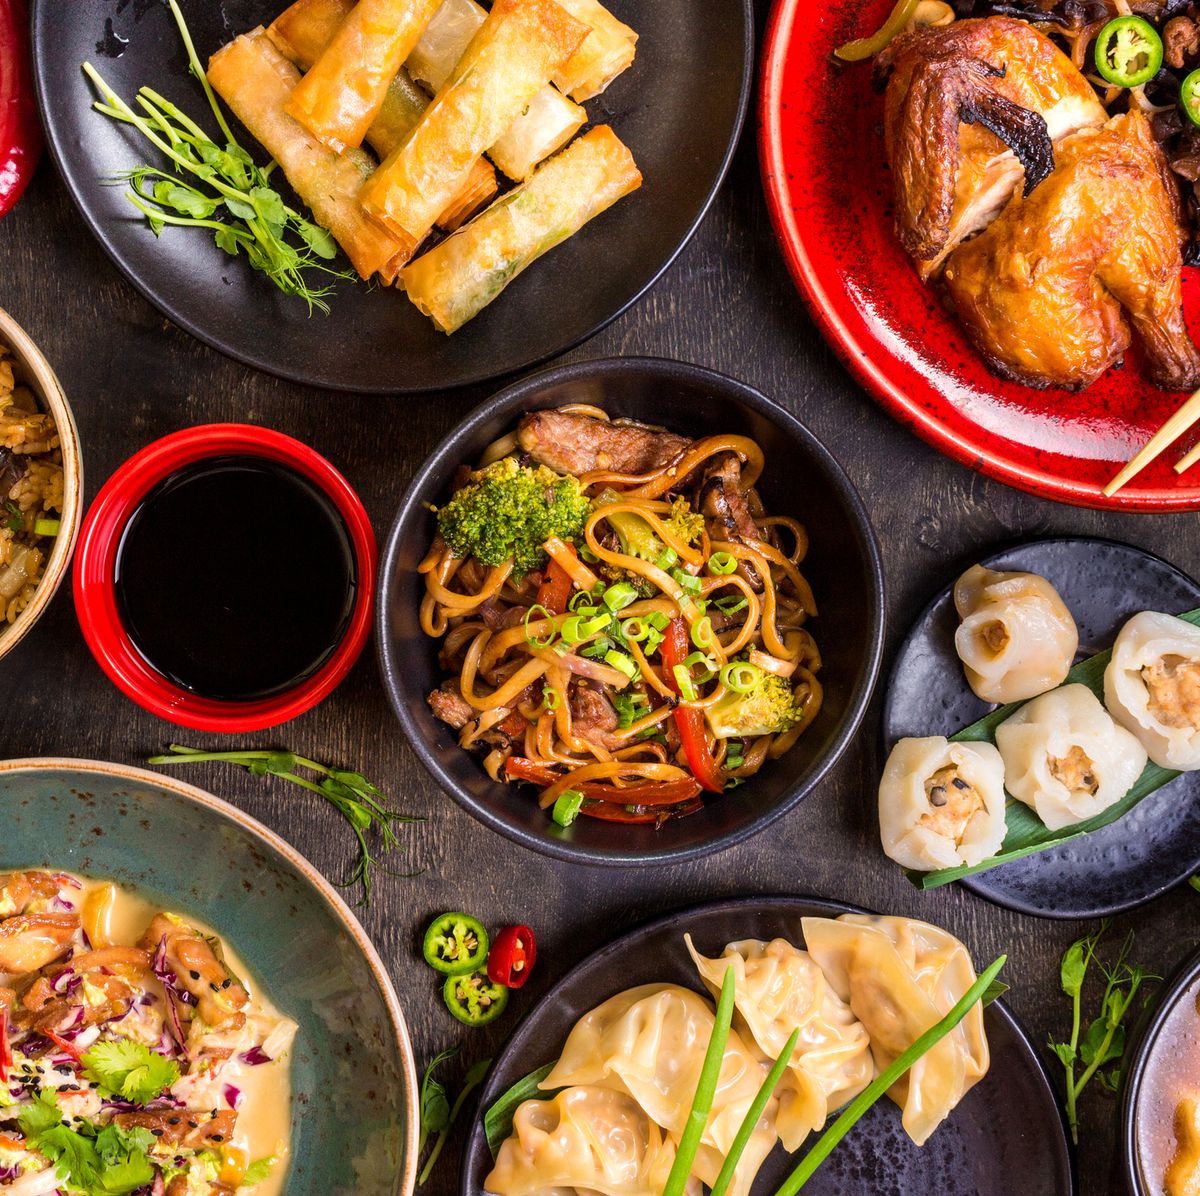 Healthy Chinese Food: 10 Great Takeout Options